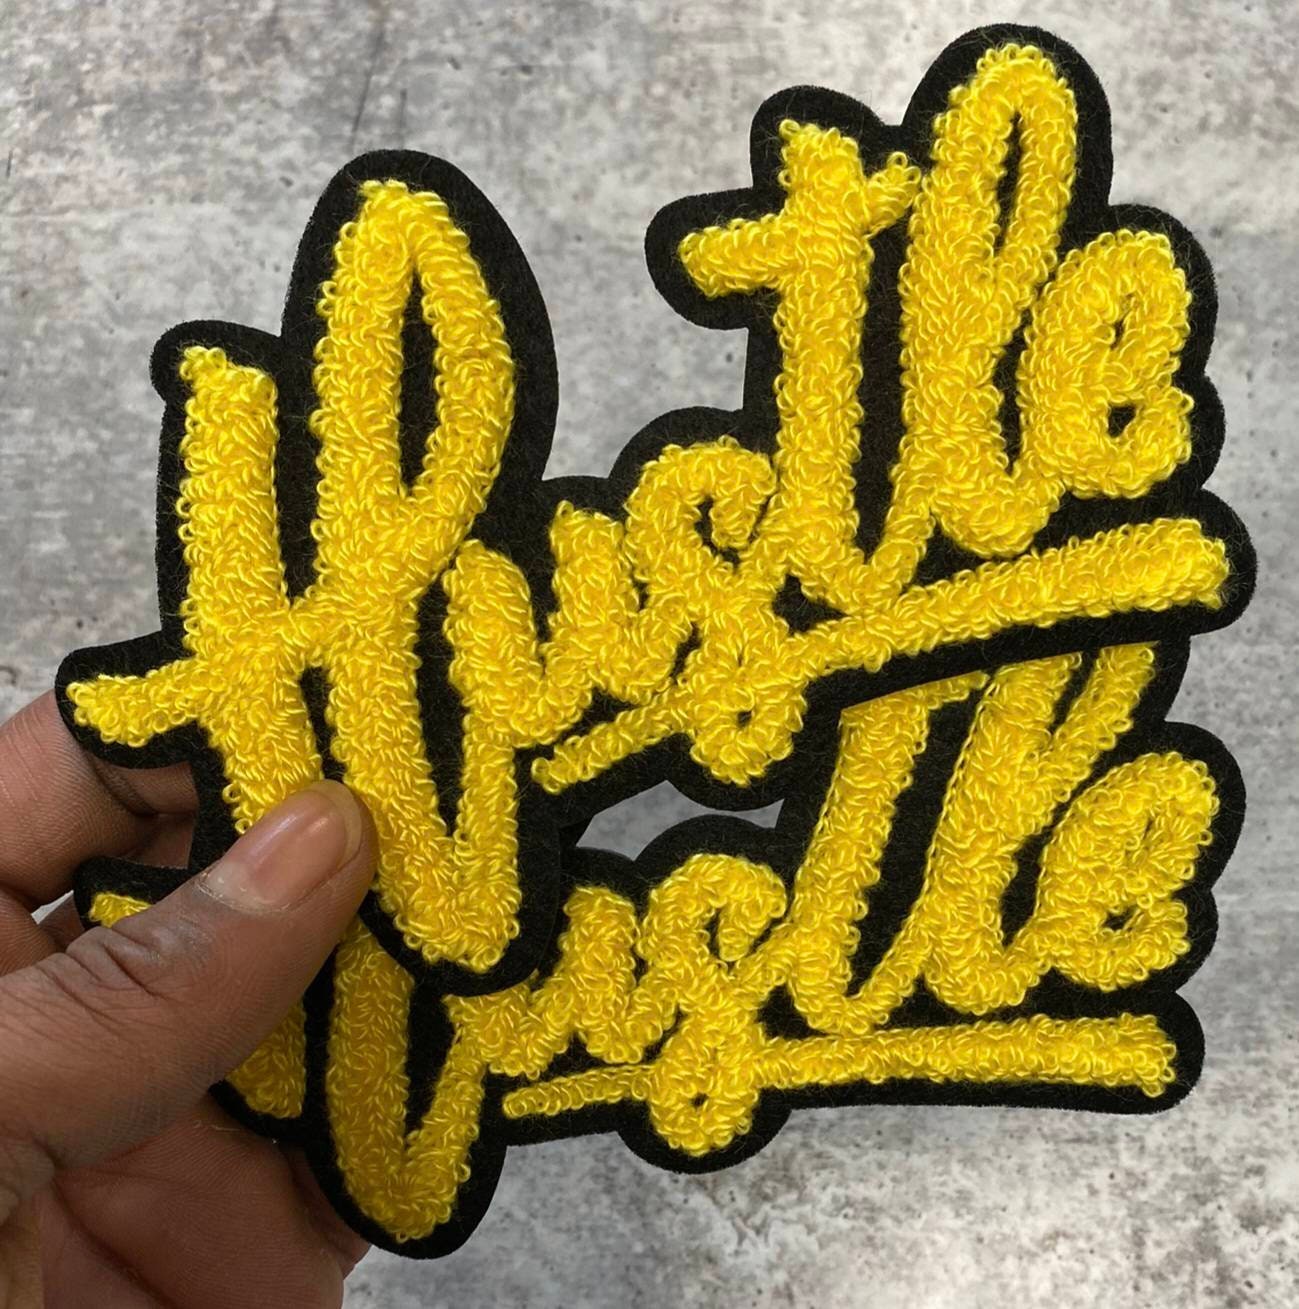 New SIZE, 1-pc Yellow & Black "Hustle" Chenille Patch (iron-on) Size 6"x4", Varsity Patch for Denim, Camos, Hoodies, Small Patch